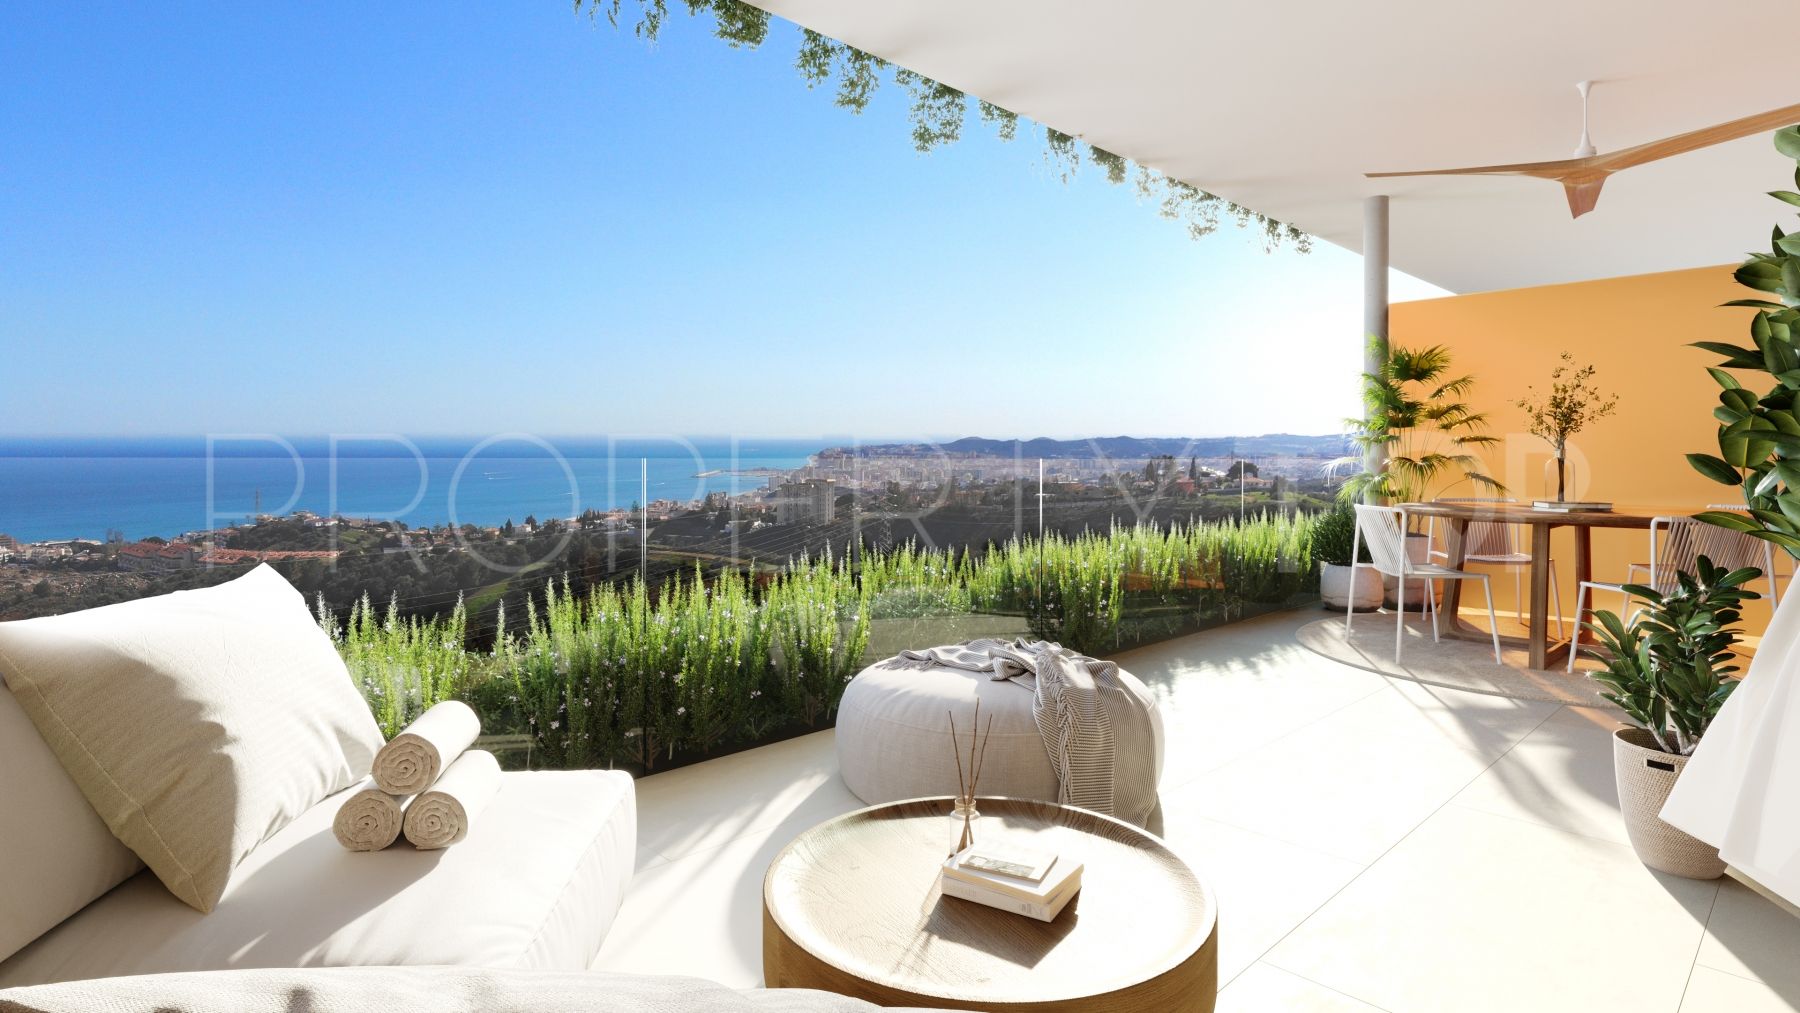 3 bedrooms penthouse in Mijas for sale